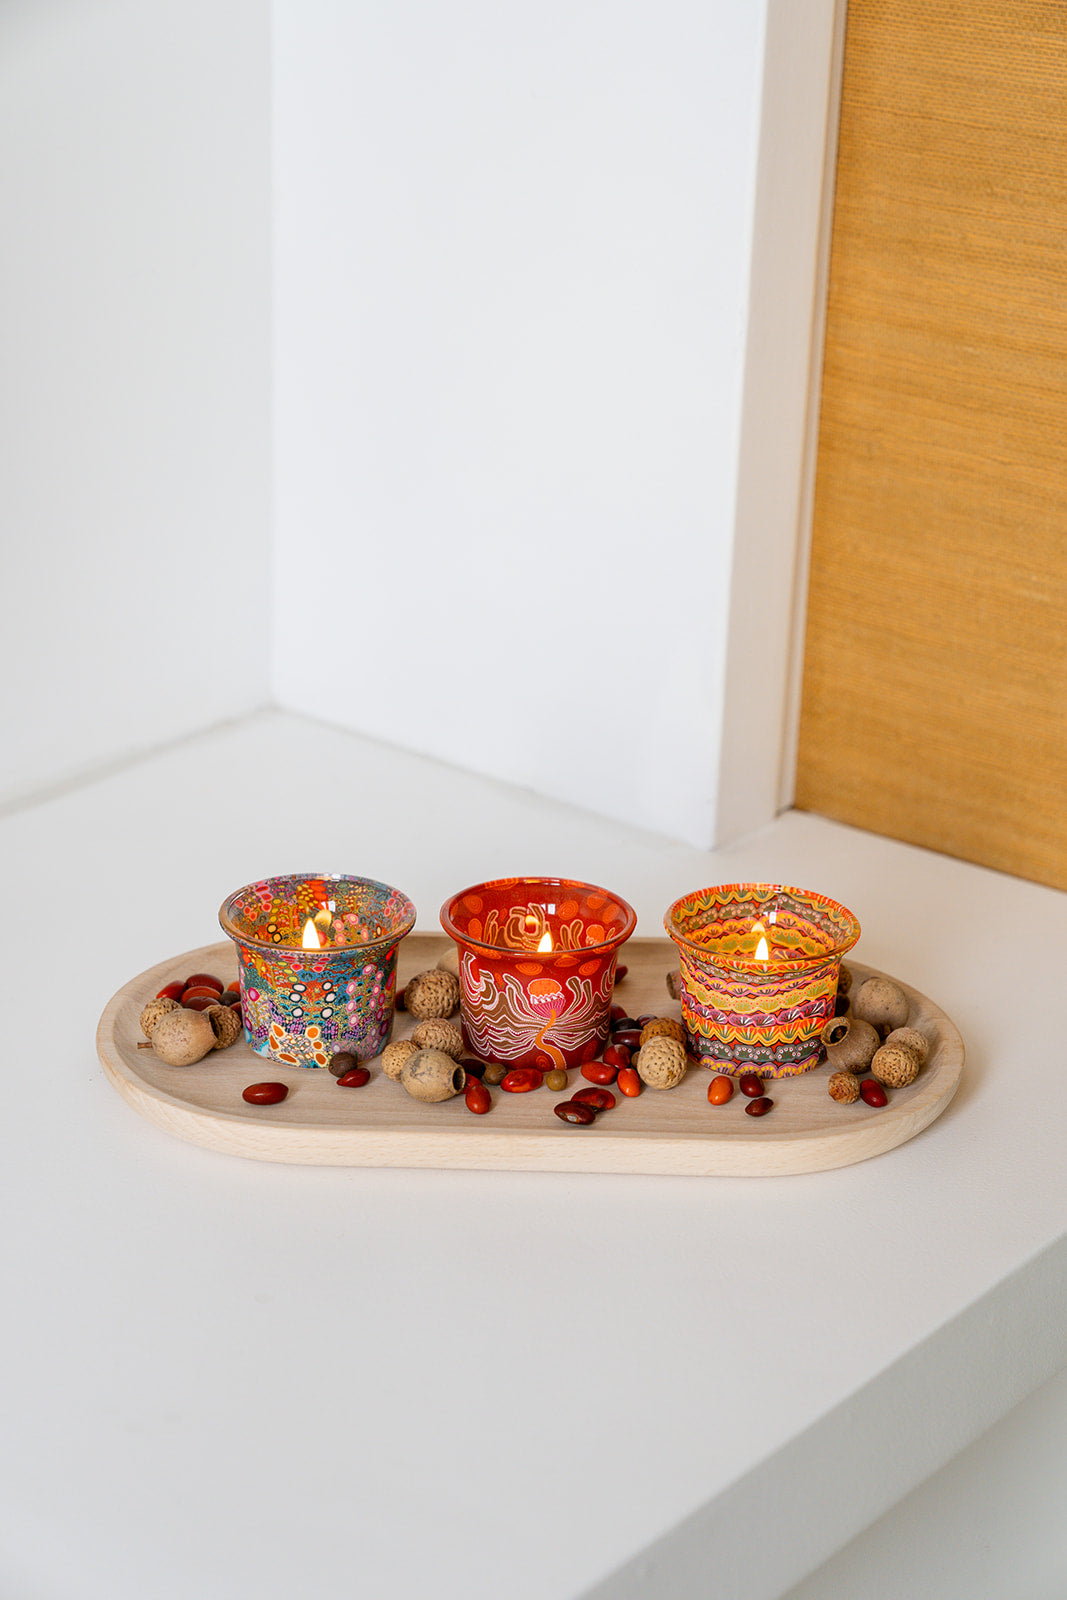 UNIQUE GIFTS FOR MOTHERS DAY - AUSTRALIAN CANDLE HOLDERS BY KOH LIVING